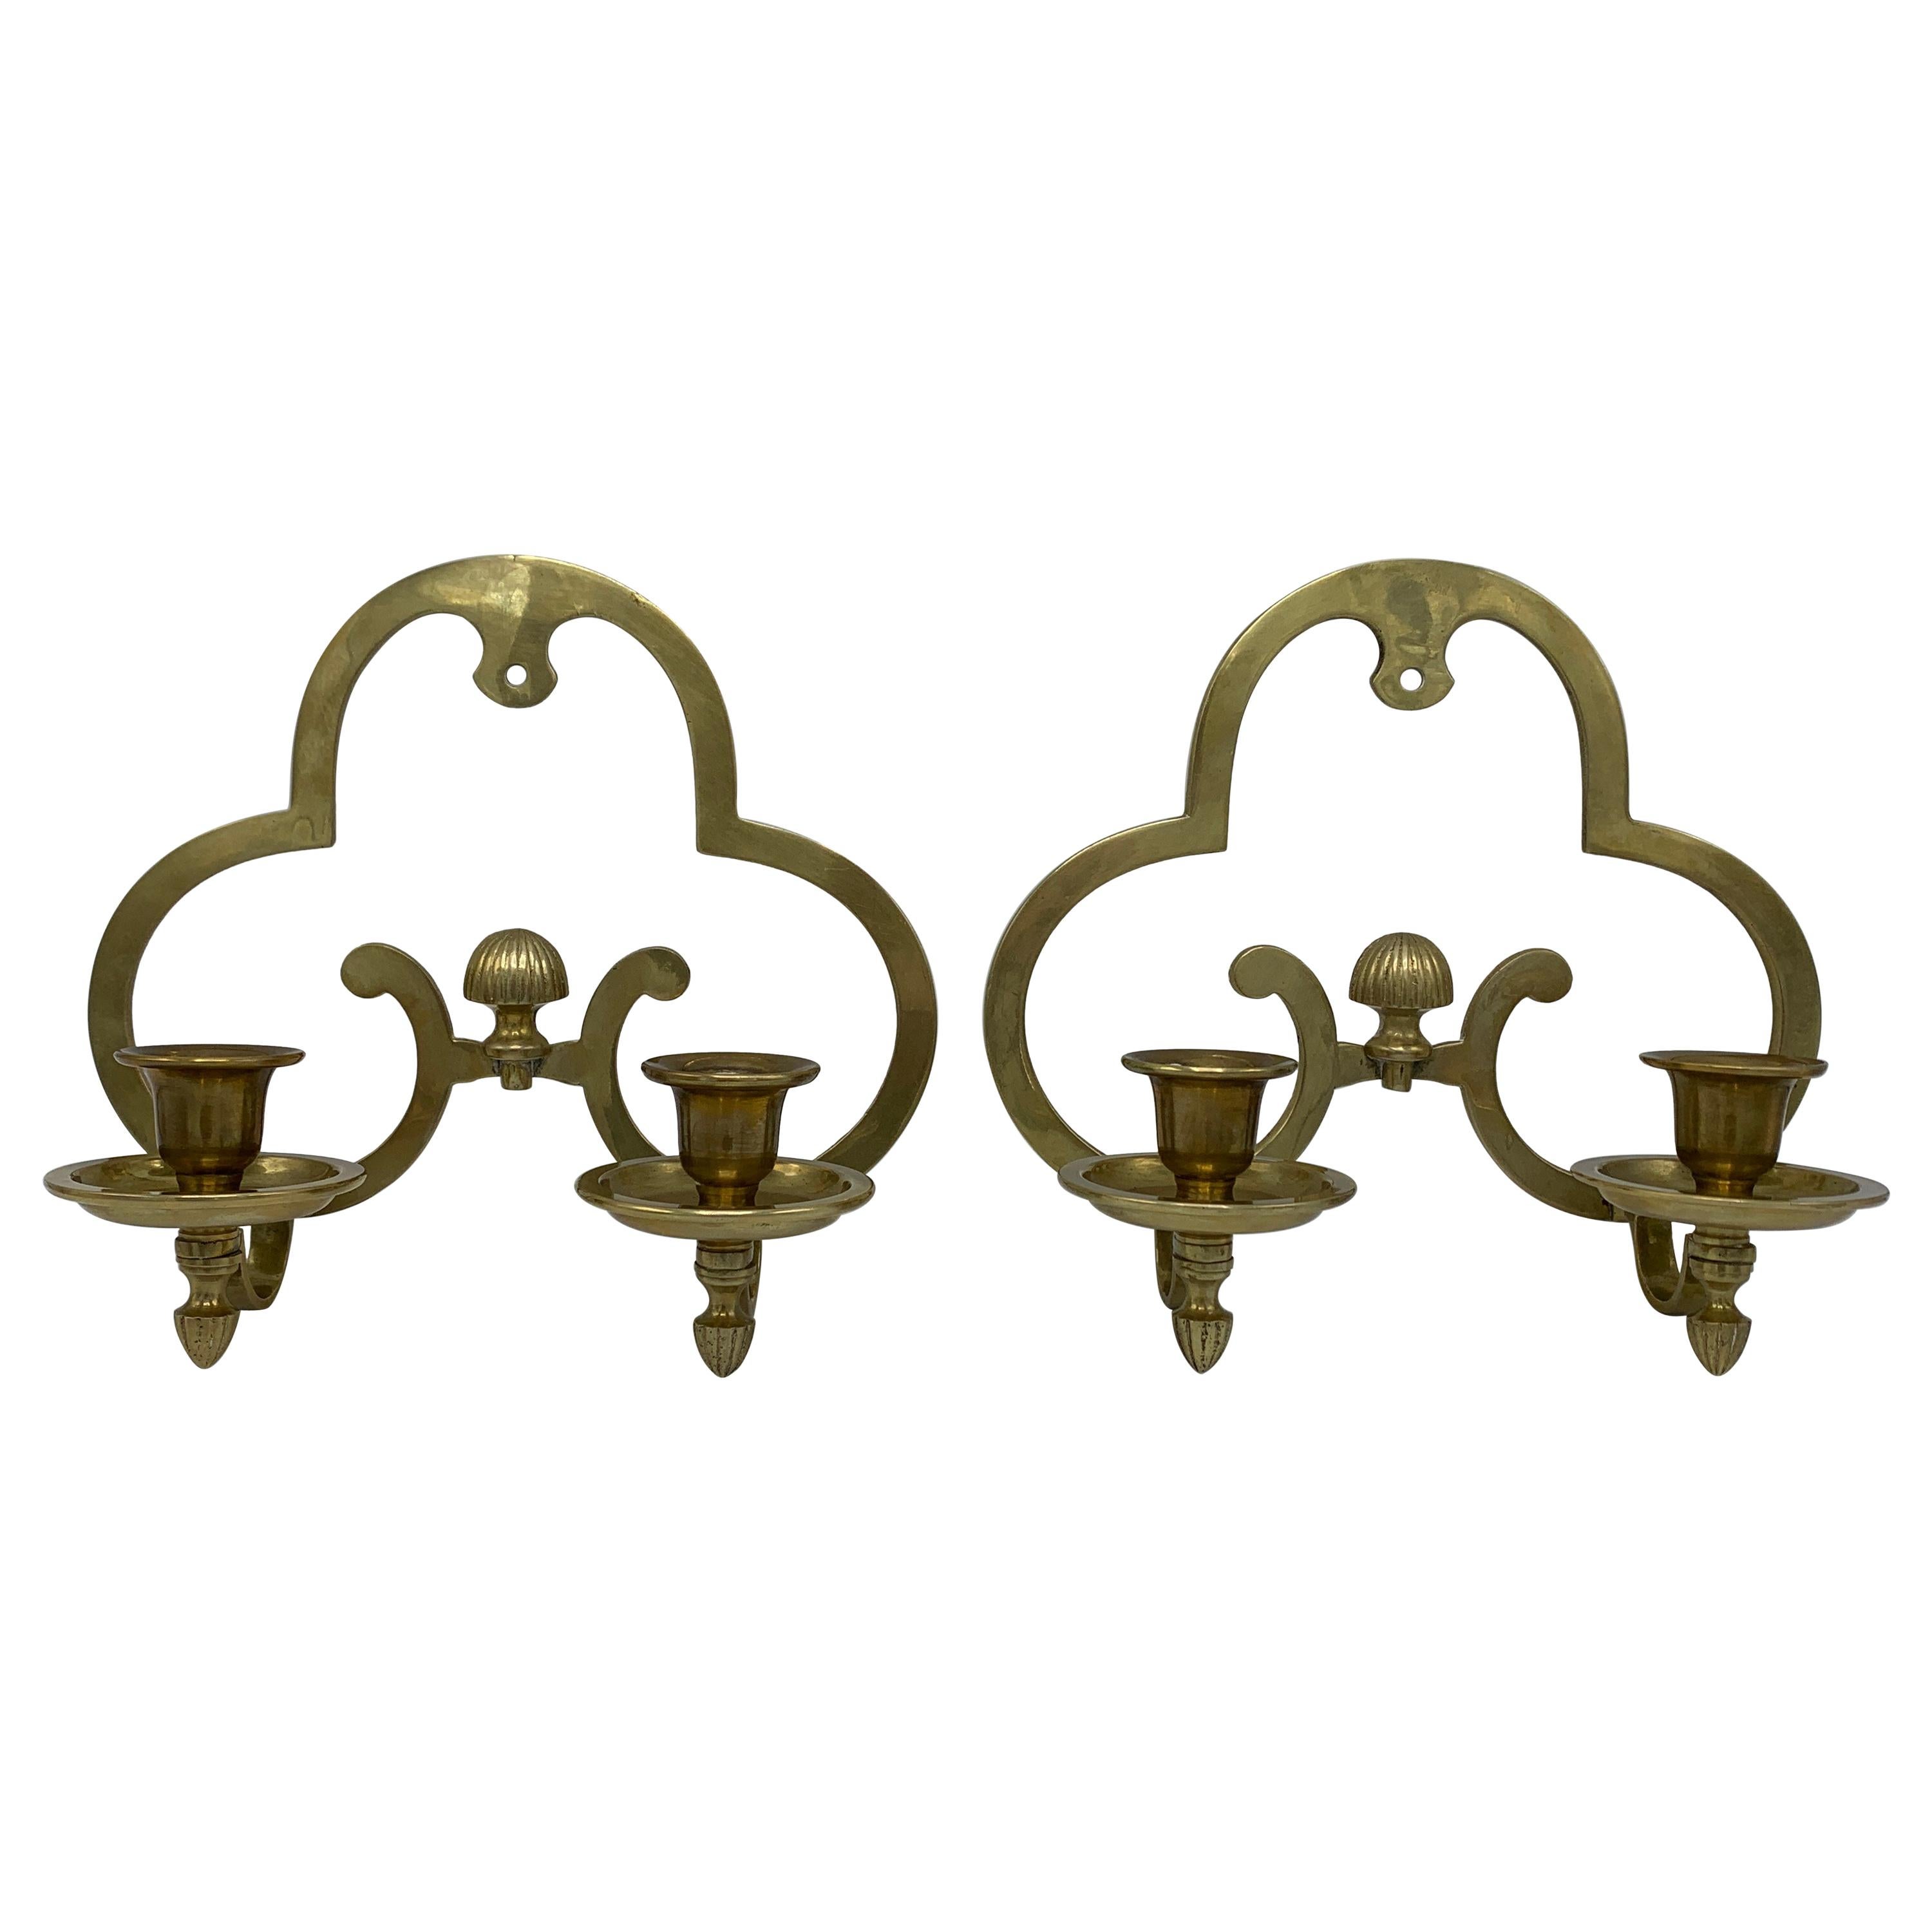 1970s Brass Candlestick Wall Sconces, Pair